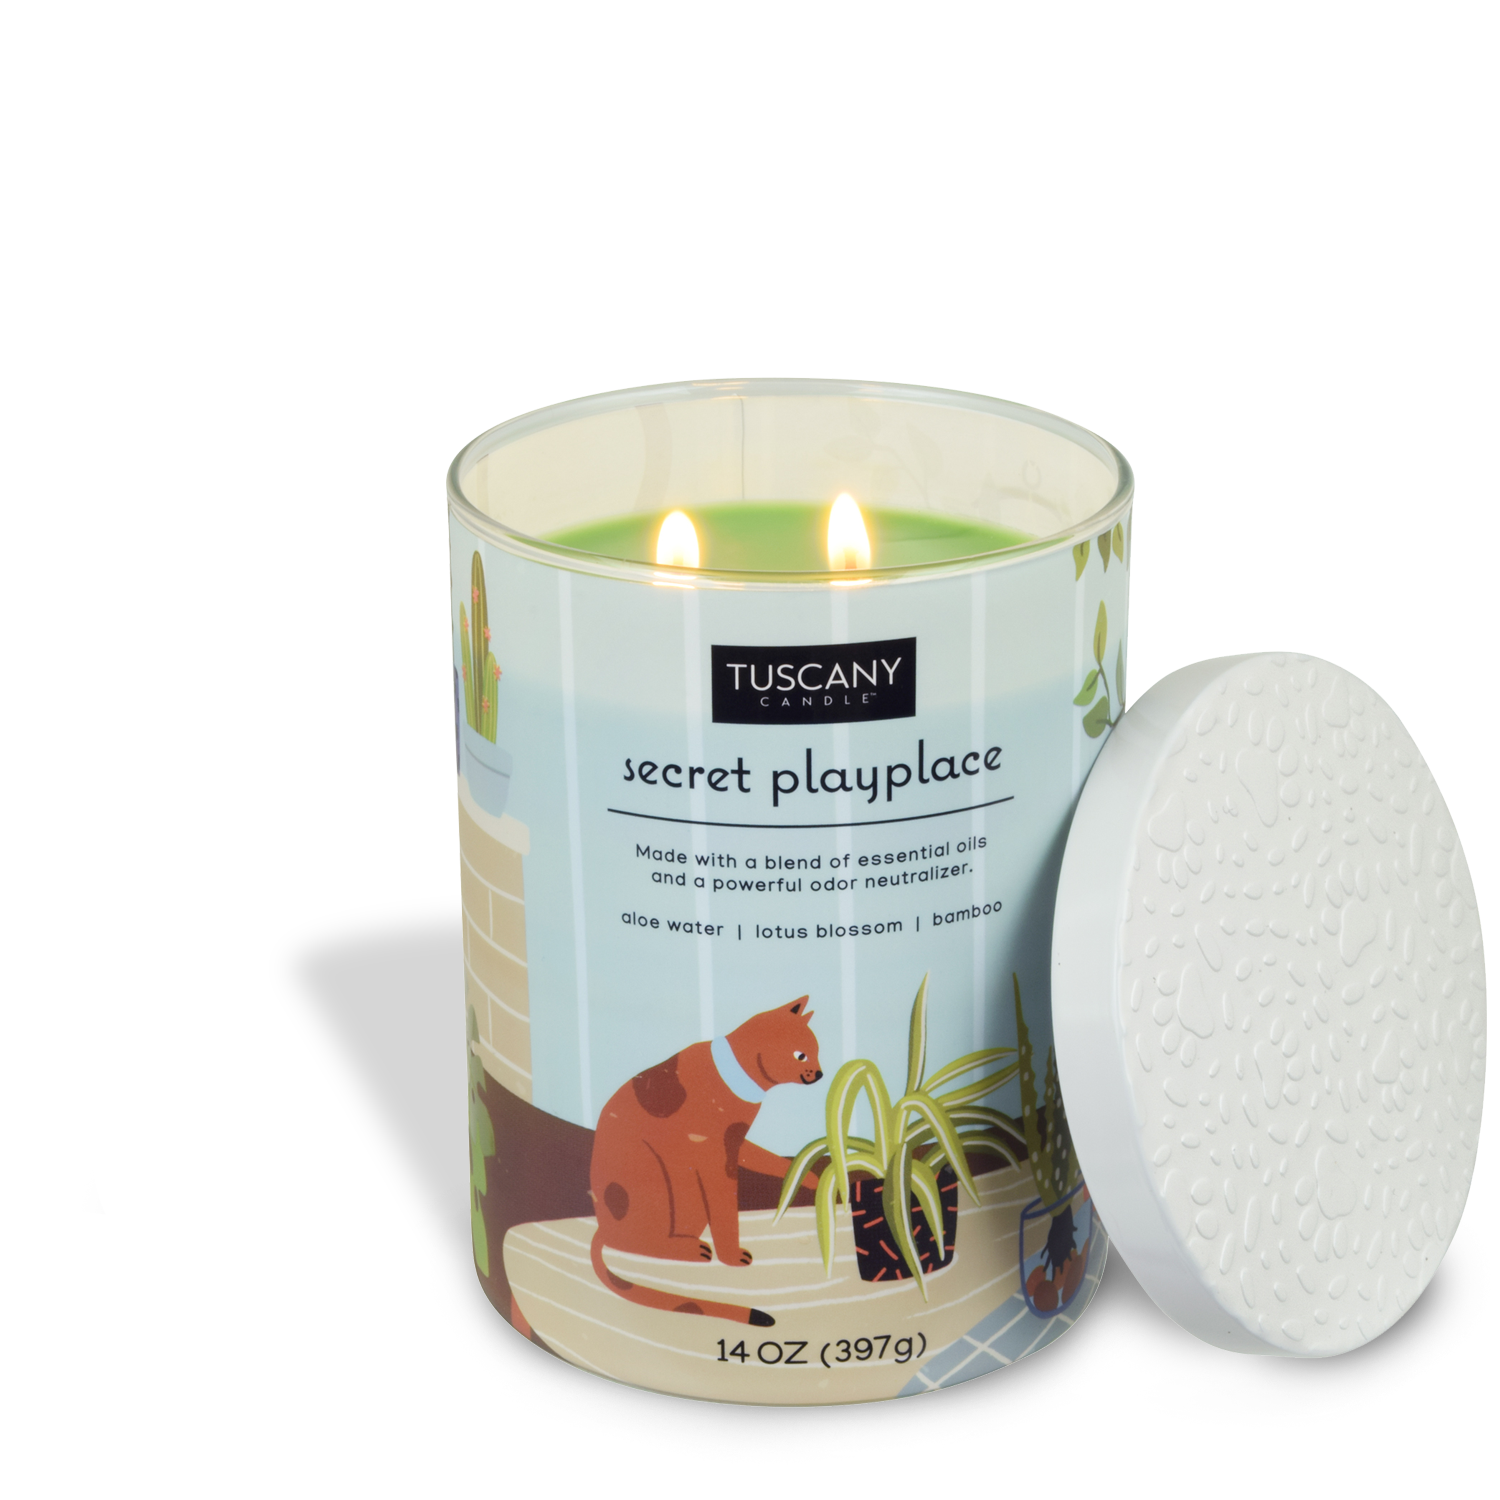 A Secret Playplace scented candle in a jar with the ability to neutralize pet odors - Tuscany Candle.